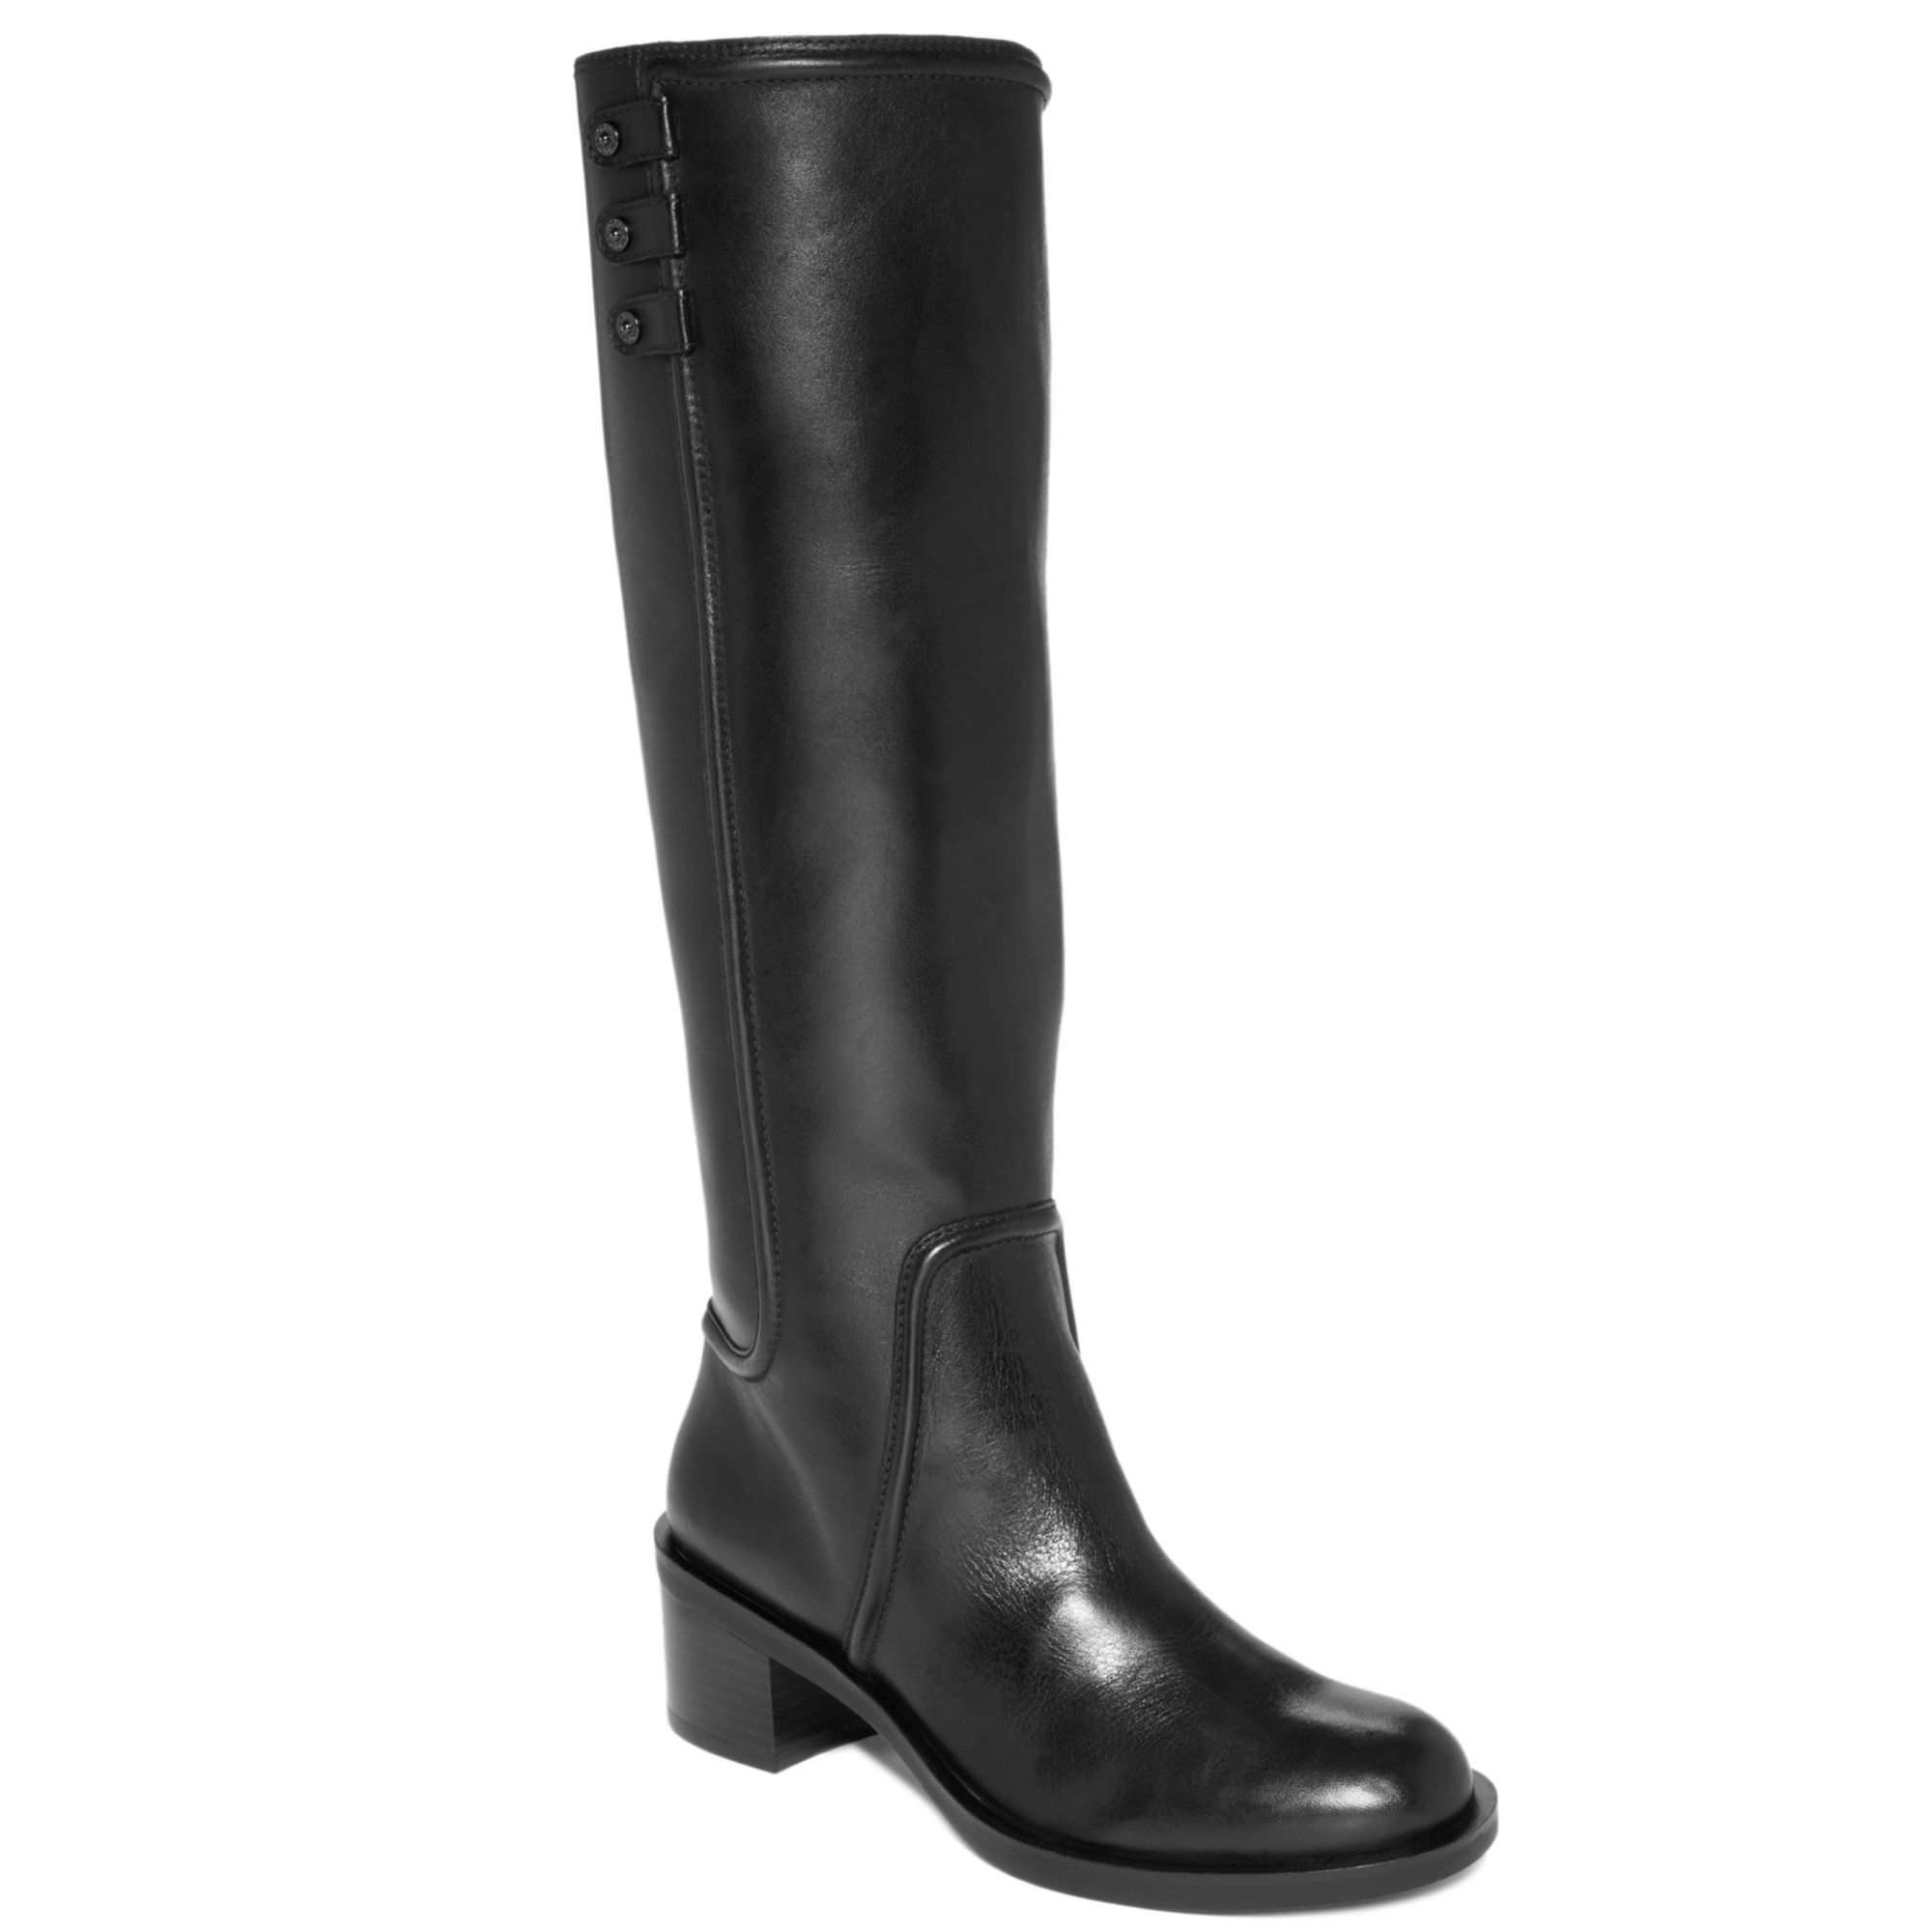 Enzo Angiolini Gregie Tall Boots in Black | Lyst